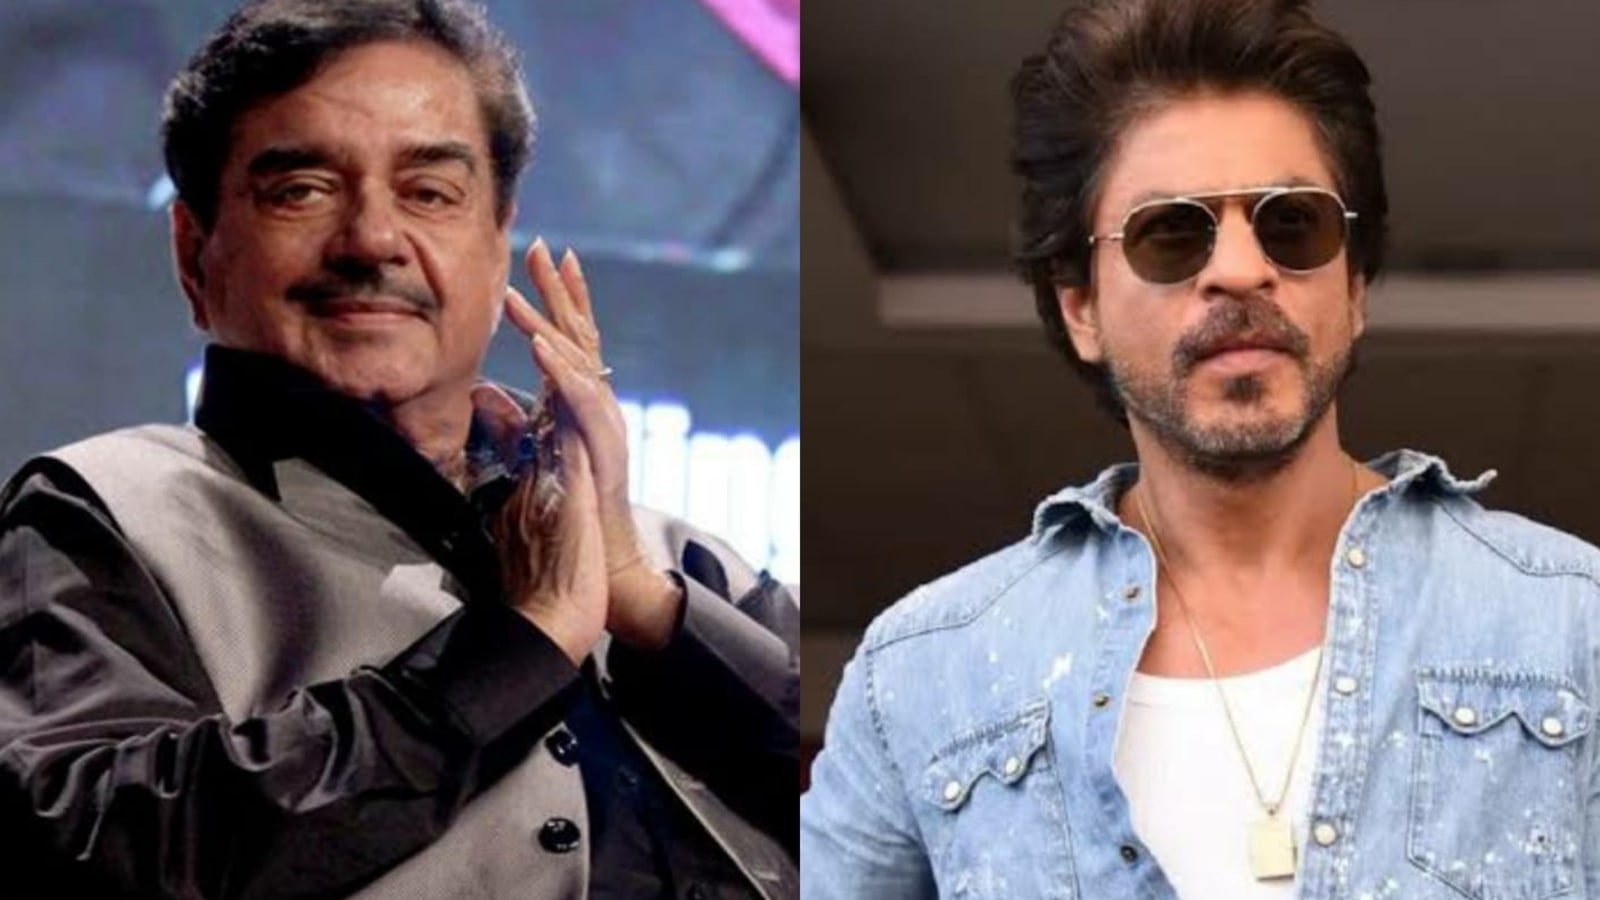 Shatrughan Sinha says Shah Rukh Khan didn’t thank him for defending Aryan Khan: ‘He should have gotten in touch with me’